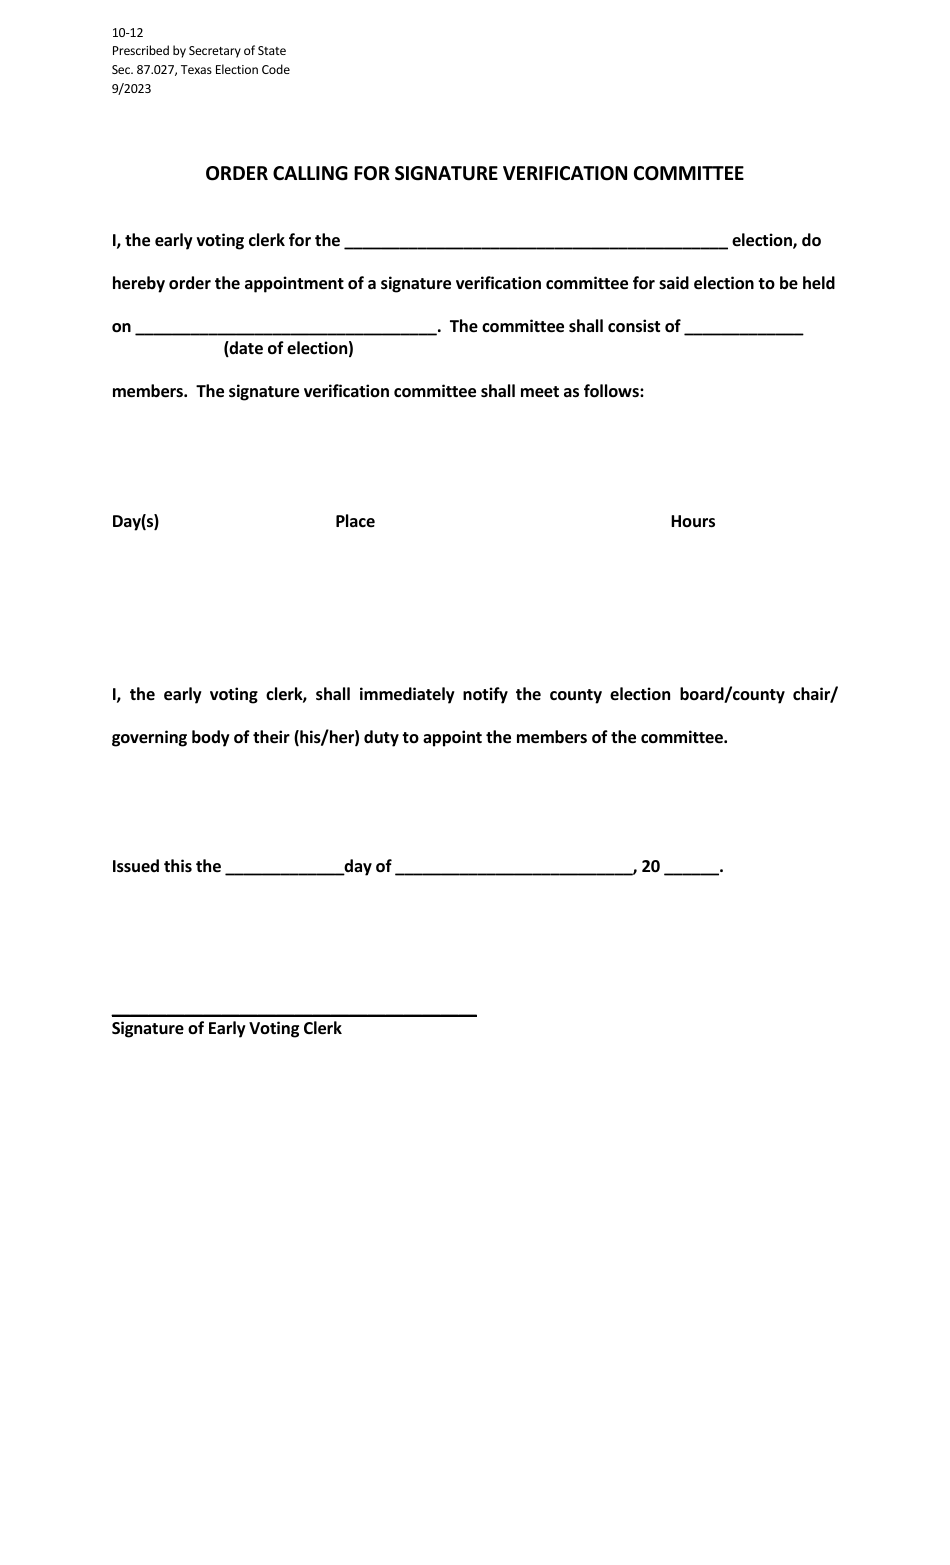 Form 10-12 Order Calling for Signature Verification Committee - Texas, Page 1